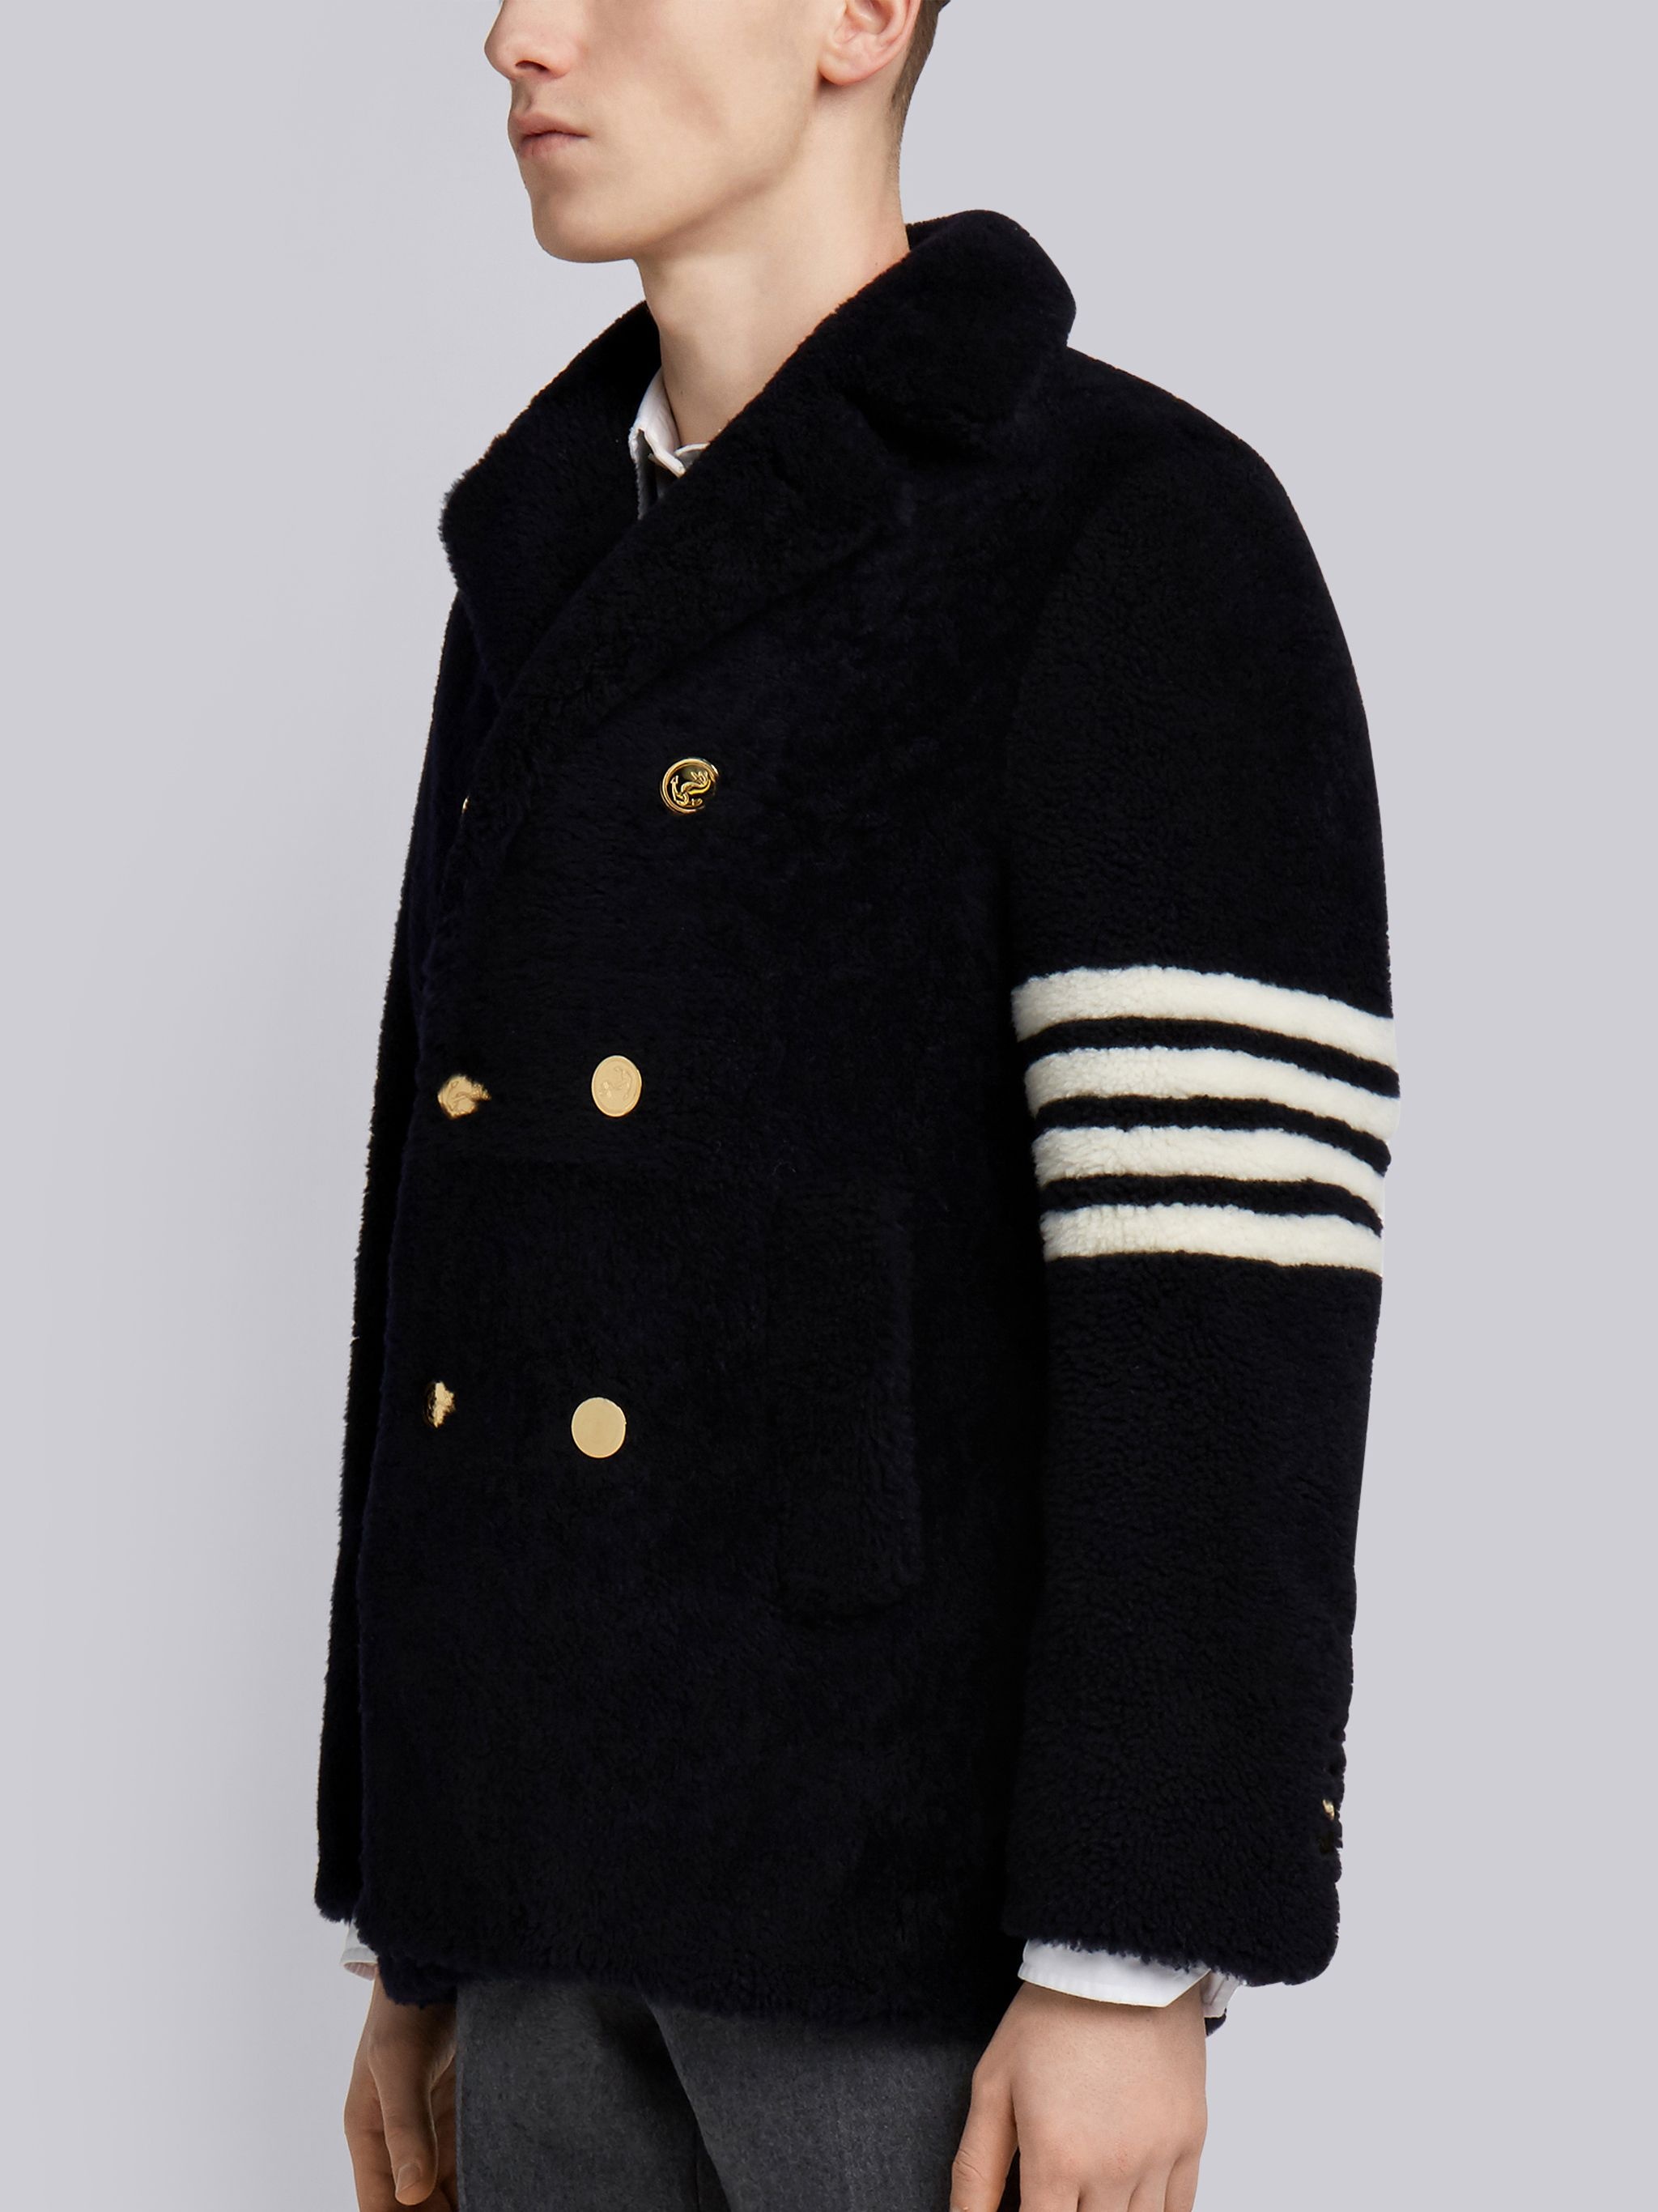 Navy Dyed Shearling 4-bar Unconstructed Peacoat - 2